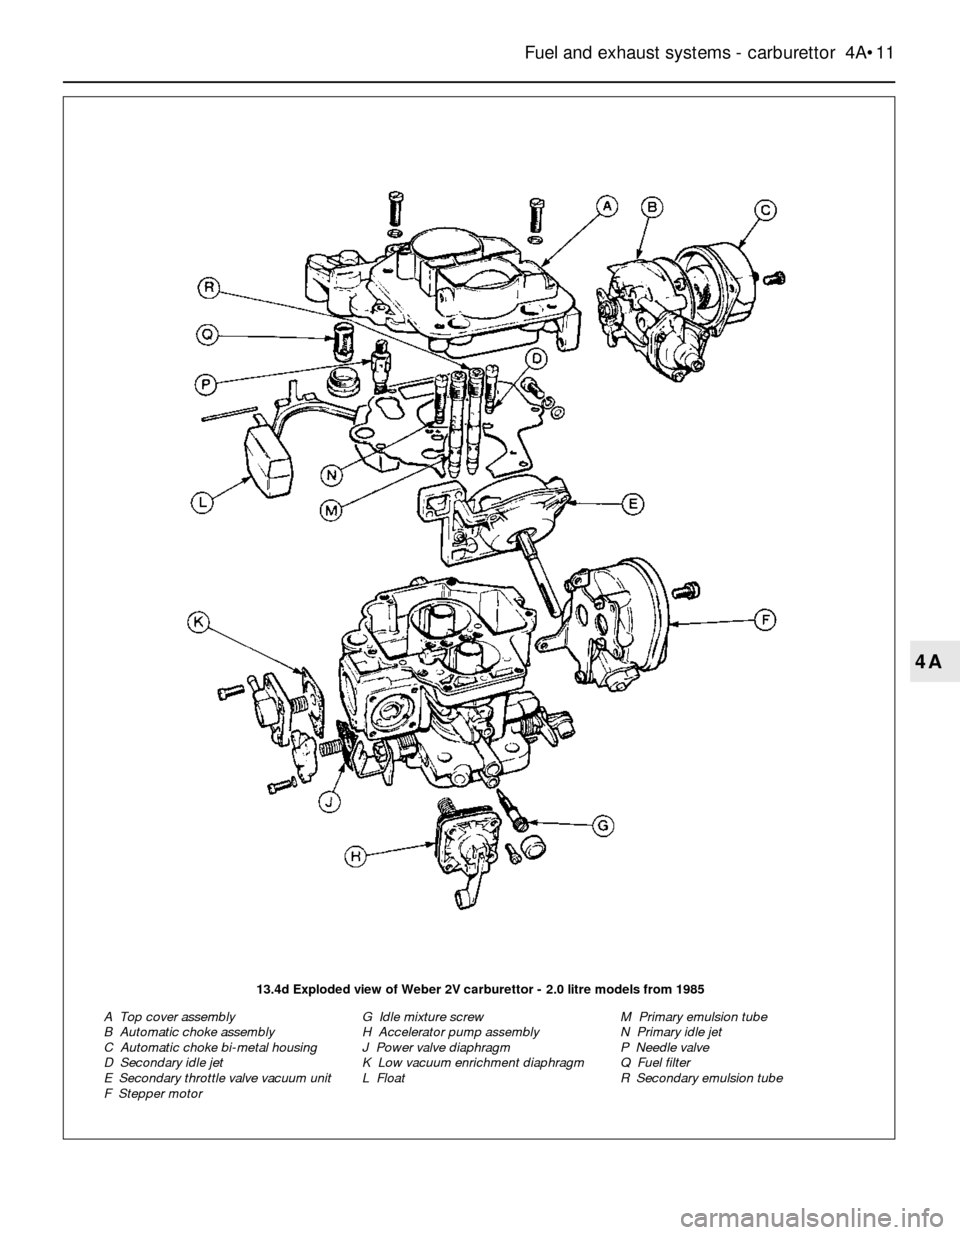 FORD SIERRA 1993 2.G Fuel And Exhaust Systems Carburettor Workshop Manual Fuel and exhaust systems - carburettor  4A•11
4A
13.4d Exploded view of Weber 2V carburettor - 2.0 litre models from 1985
A  Top cover assembly
B  Automatic choke assembly
C  Automatic choke bi-meta